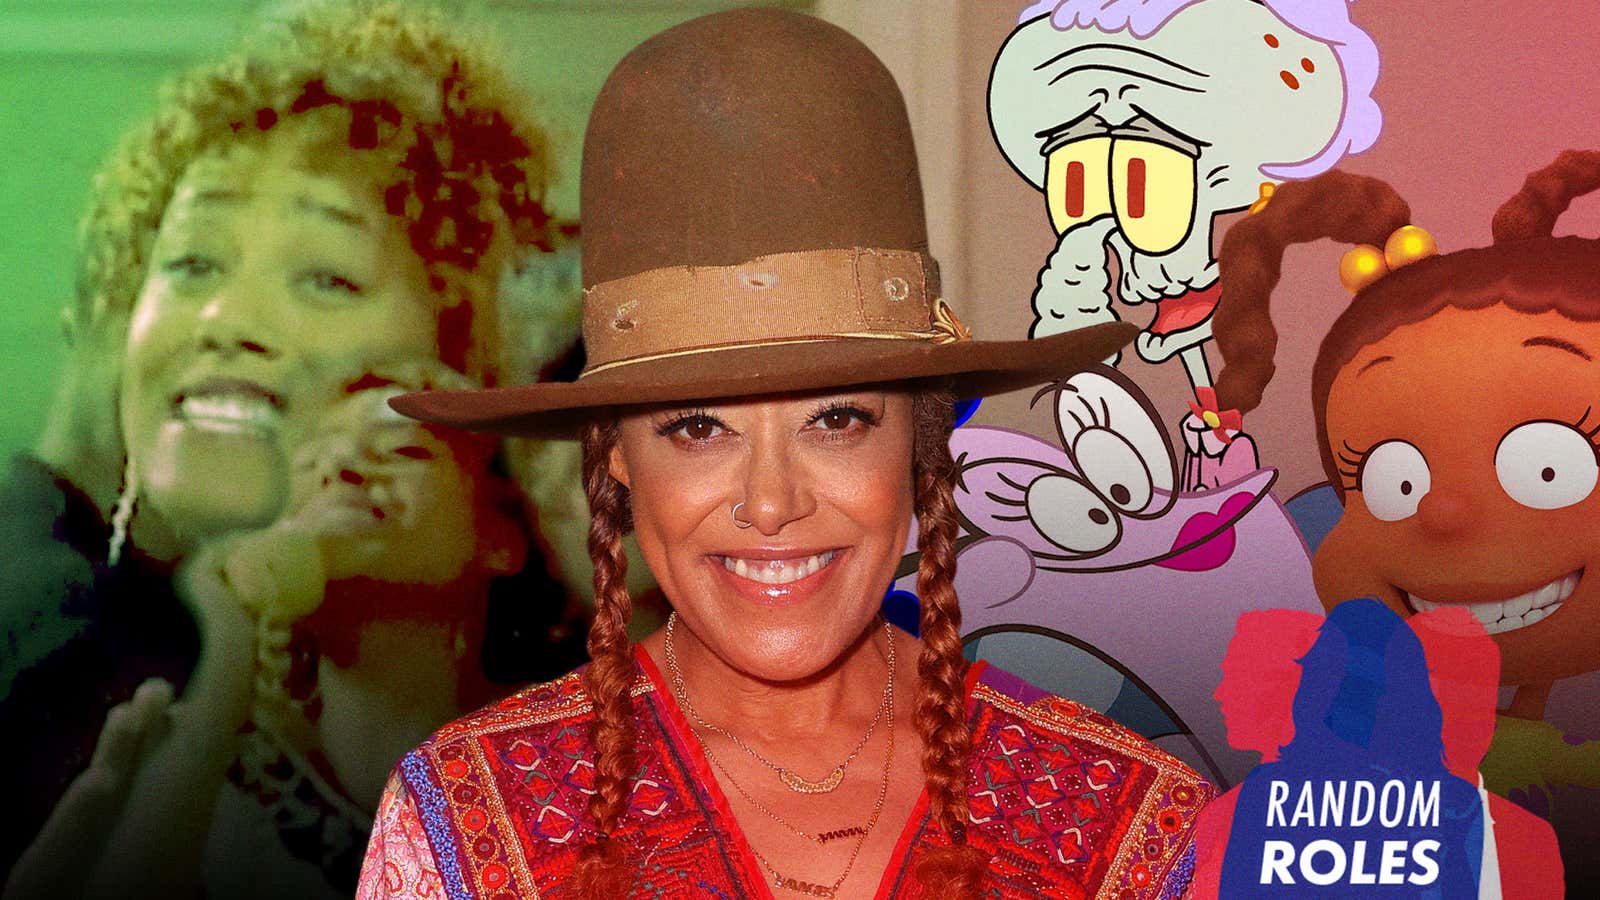 Center photo: JC Olivera/Getty Images; Background left screenshot: A Different World. Other images courtesy of Nickelodeon